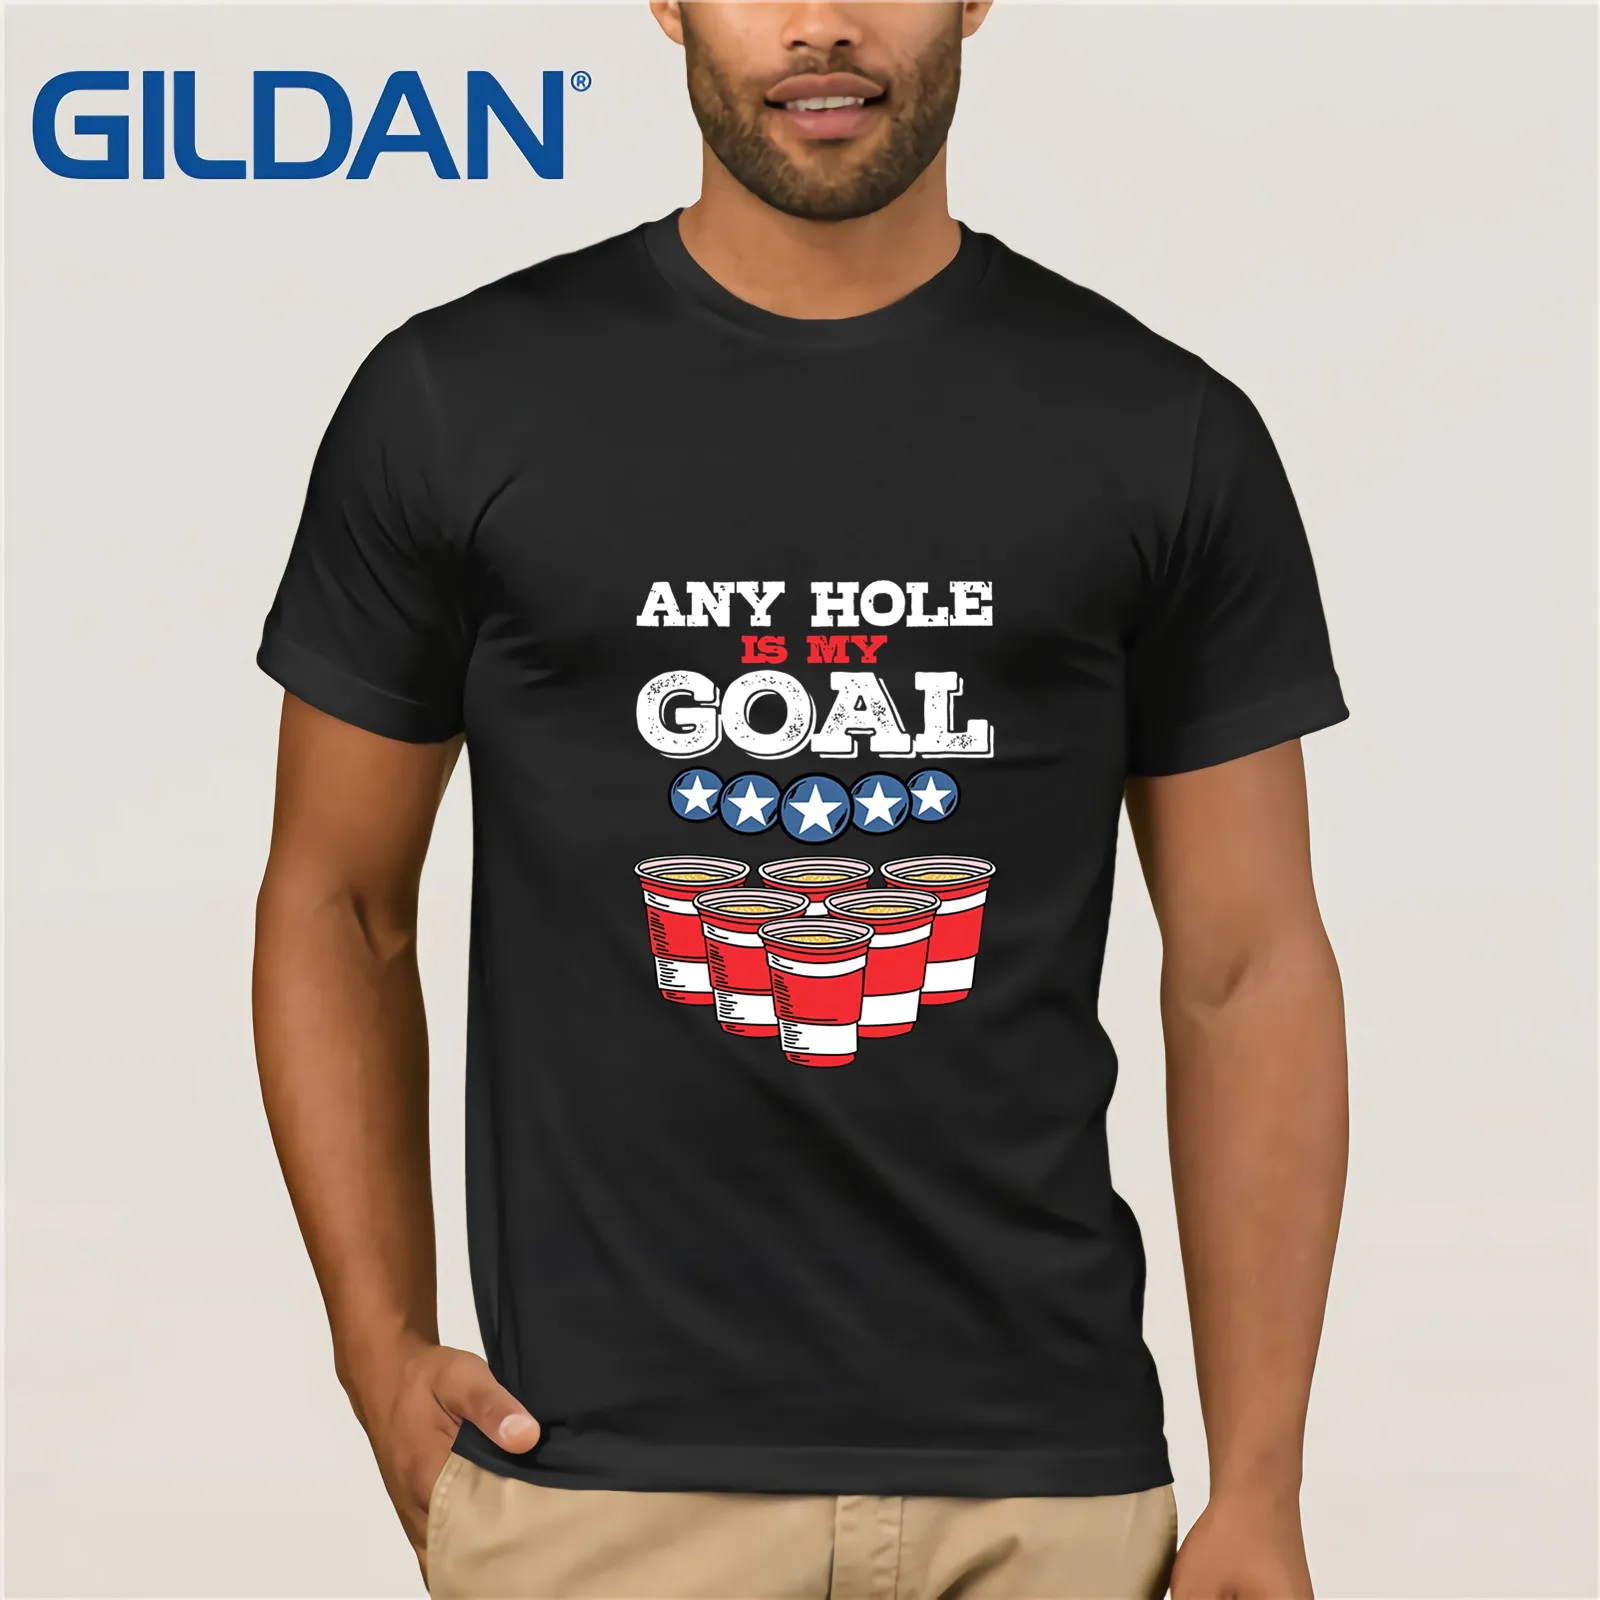 

Men Shirt Any Hole Is My Goal! Funny Beer Pong Drinking Champ T-Shirt Men's Short Sleeve T-Shirt Streetwear Tees for Men Tops